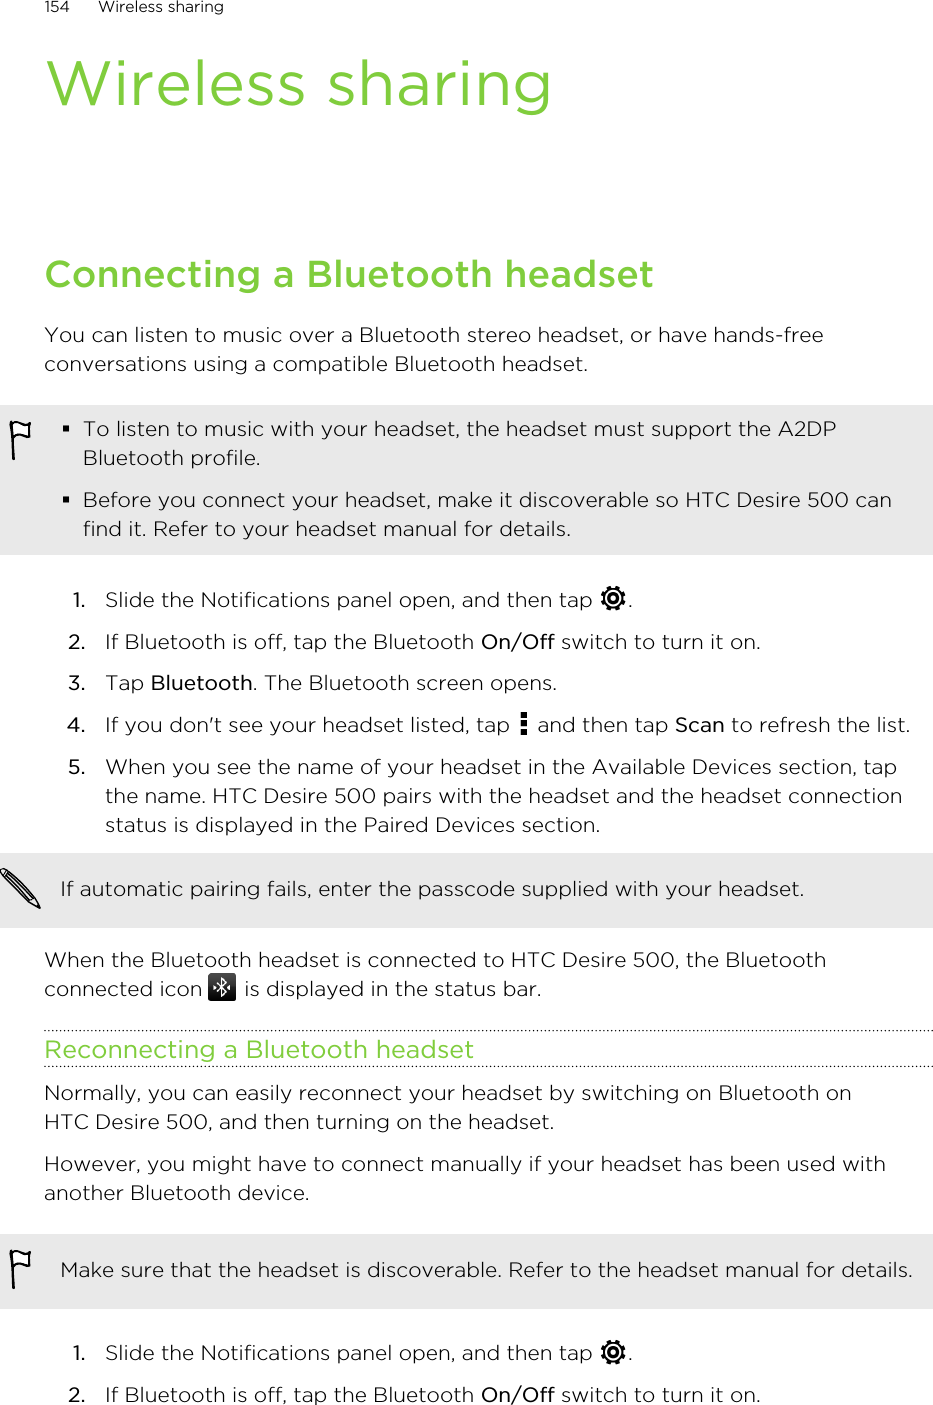 Wireless sharingConnecting a Bluetooth headsetYou can listen to music over a Bluetooth stereo headset, or have hands-freeconversations using a compatible Bluetooth headset.§To listen to music with your headset, the headset must support the A2DPBluetooth profile.§Before you connect your headset, make it discoverable so HTC Desire 500 canfind it. Refer to your headset manual for details.1. Slide the Notifications panel open, and then tap  .2. If Bluetooth is off, tap the Bluetooth On/Off switch to turn it on.3. Tap Bluetooth. The Bluetooth screen opens.4. If you don&apos;t see your headset listed, tap   and then tap Scan to refresh the list.5. When you see the name of your headset in the Available Devices section, tapthe name. HTC Desire 500 pairs with the headset and the headset connectionstatus is displayed in the Paired Devices section.If automatic pairing fails, enter the passcode supplied with your headset.When the Bluetooth headset is connected to HTC Desire 500, the Bluetoothconnected icon   is displayed in the status bar.Reconnecting a Bluetooth headsetNormally, you can easily reconnect your headset by switching on Bluetooth onHTC Desire 500, and then turning on the headset.However, you might have to connect manually if your headset has been used withanother Bluetooth device.Make sure that the headset is discoverable. Refer to the headset manual for details.1. Slide the Notifications panel open, and then tap  .2. If Bluetooth is off, tap the Bluetooth On/Off switch to turn it on.154 Wireless sharing